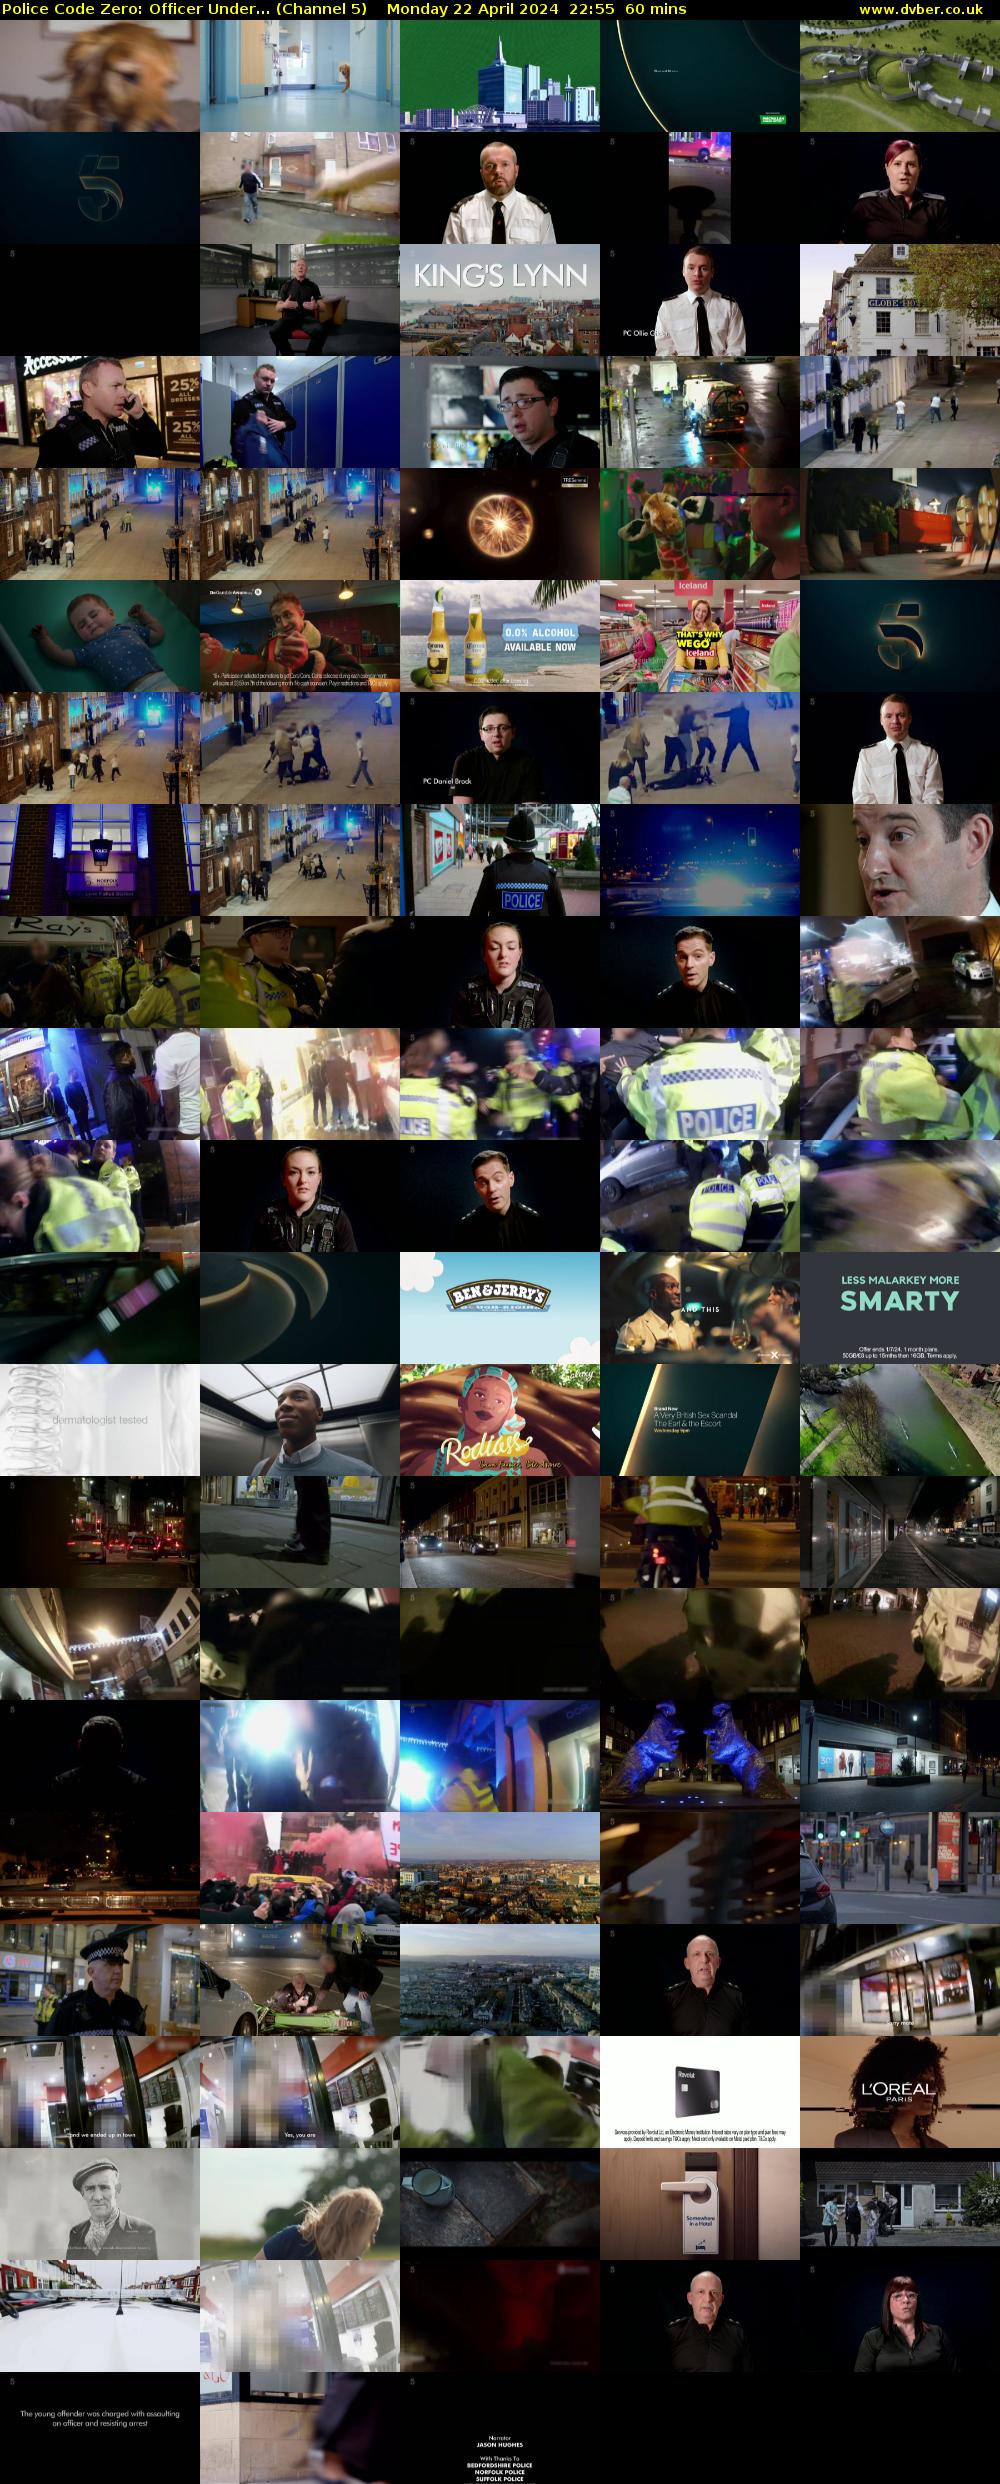 Police Code Zero: Officer Under... (Channel 5) Monday 22 April 2024 22:55 - 23:55